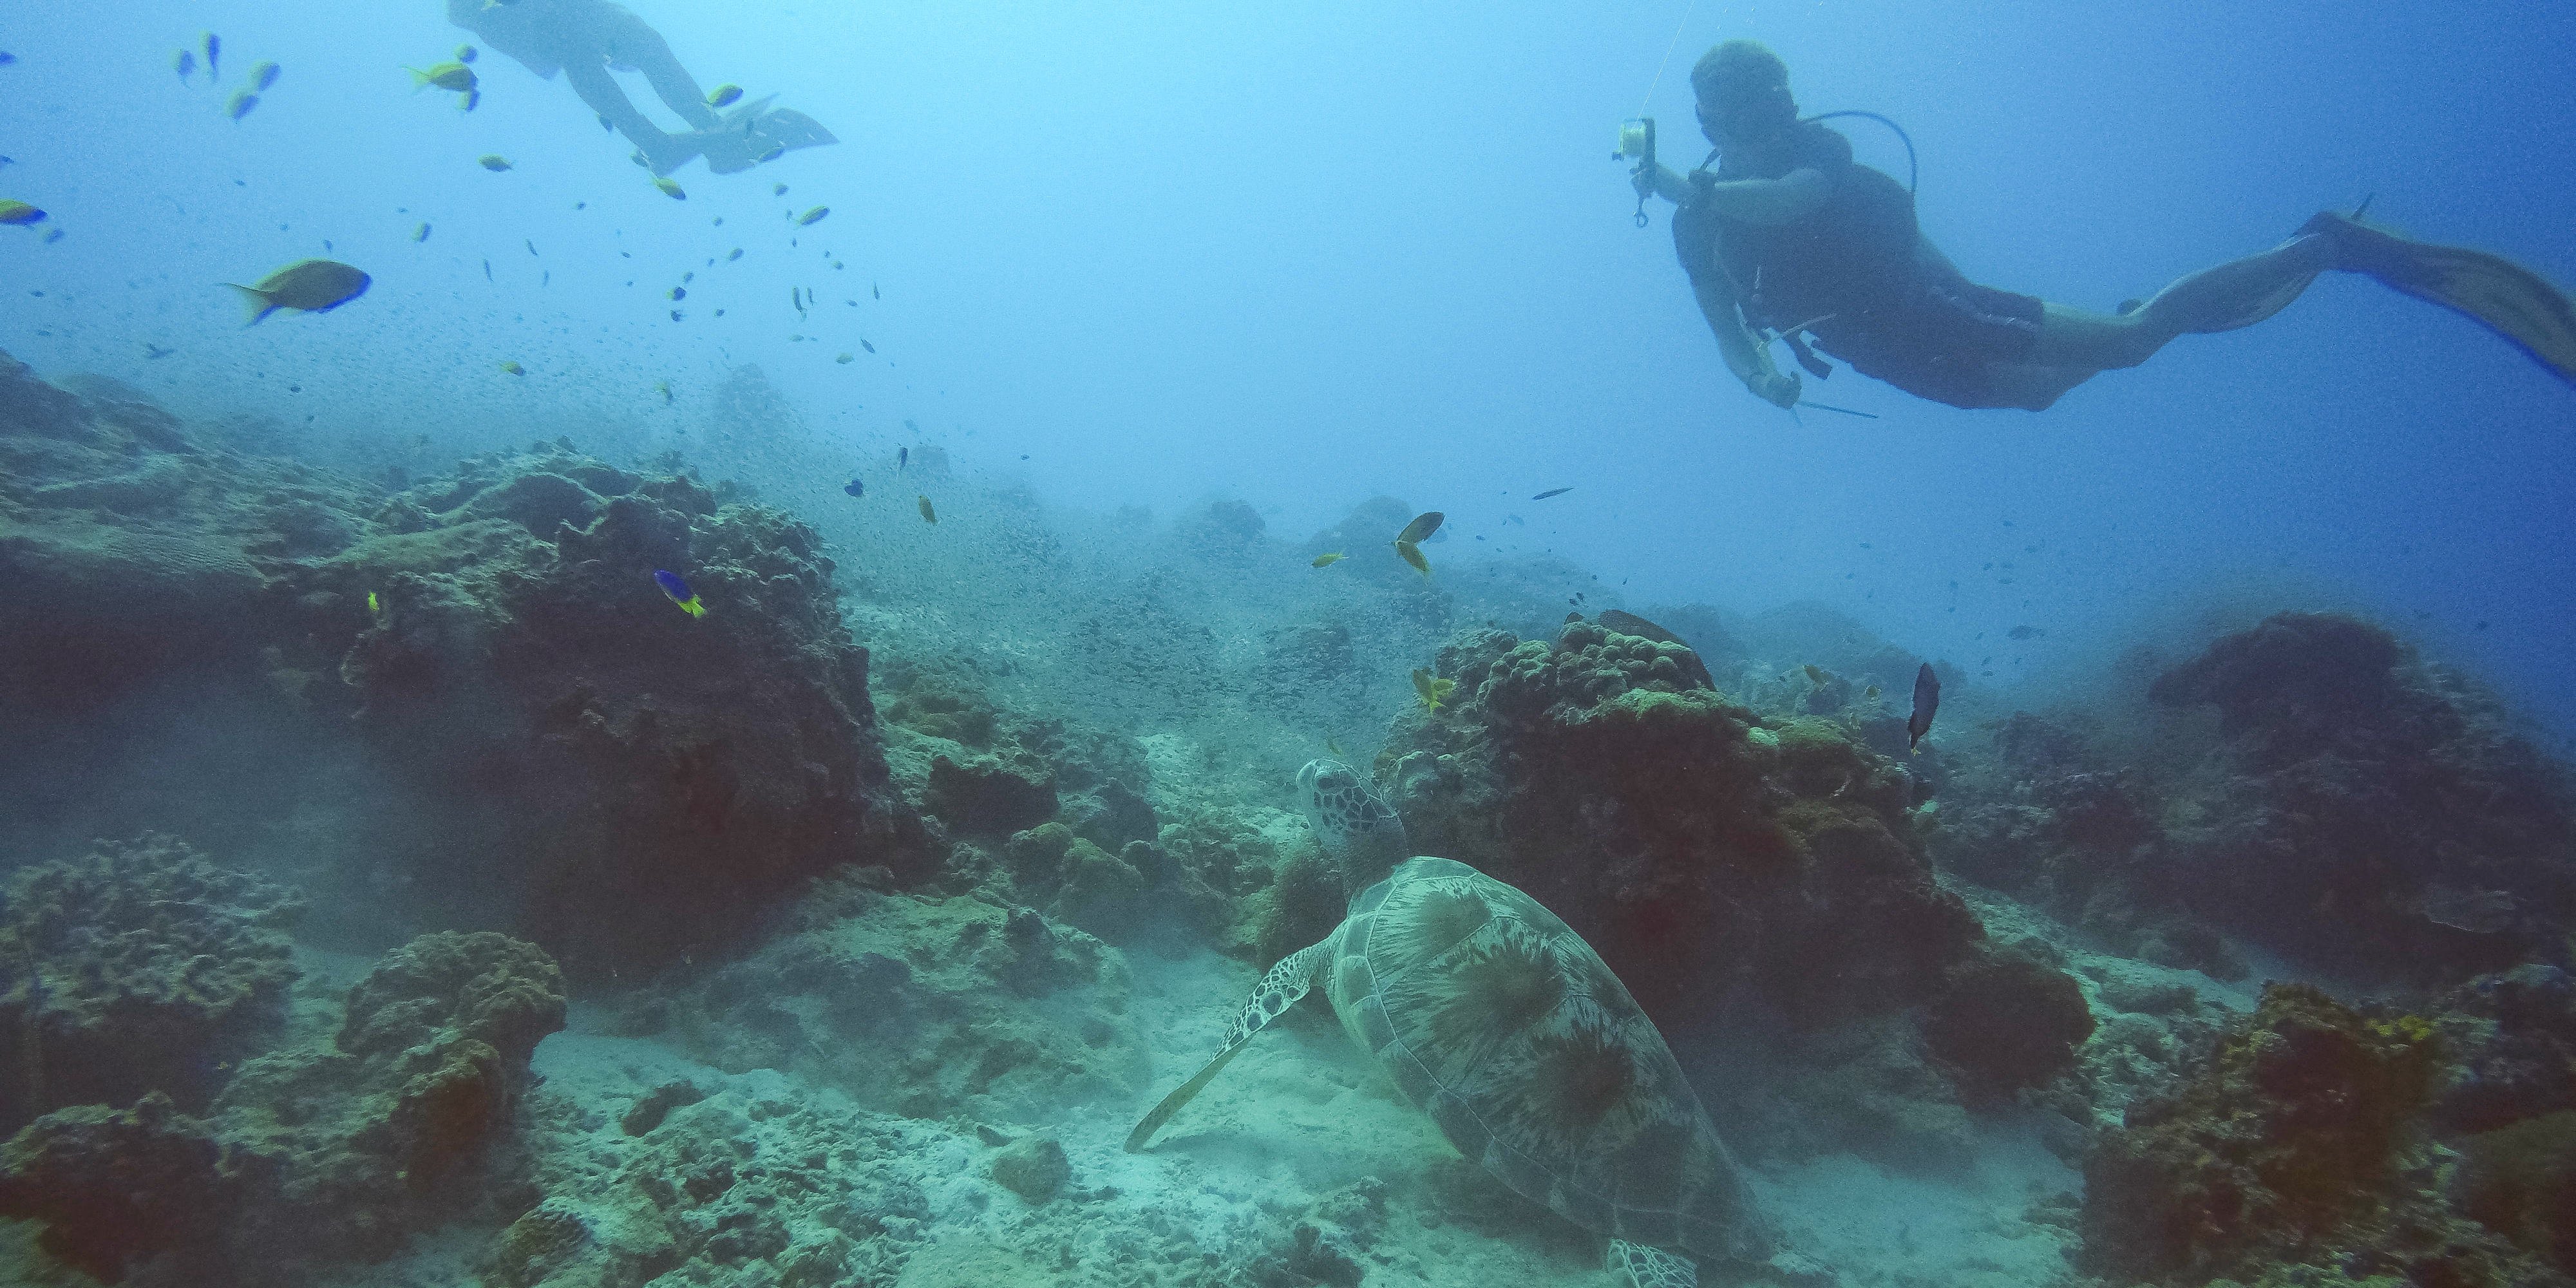 GVI participants explore the coral reefs surrounding Mahe while on a gap year.